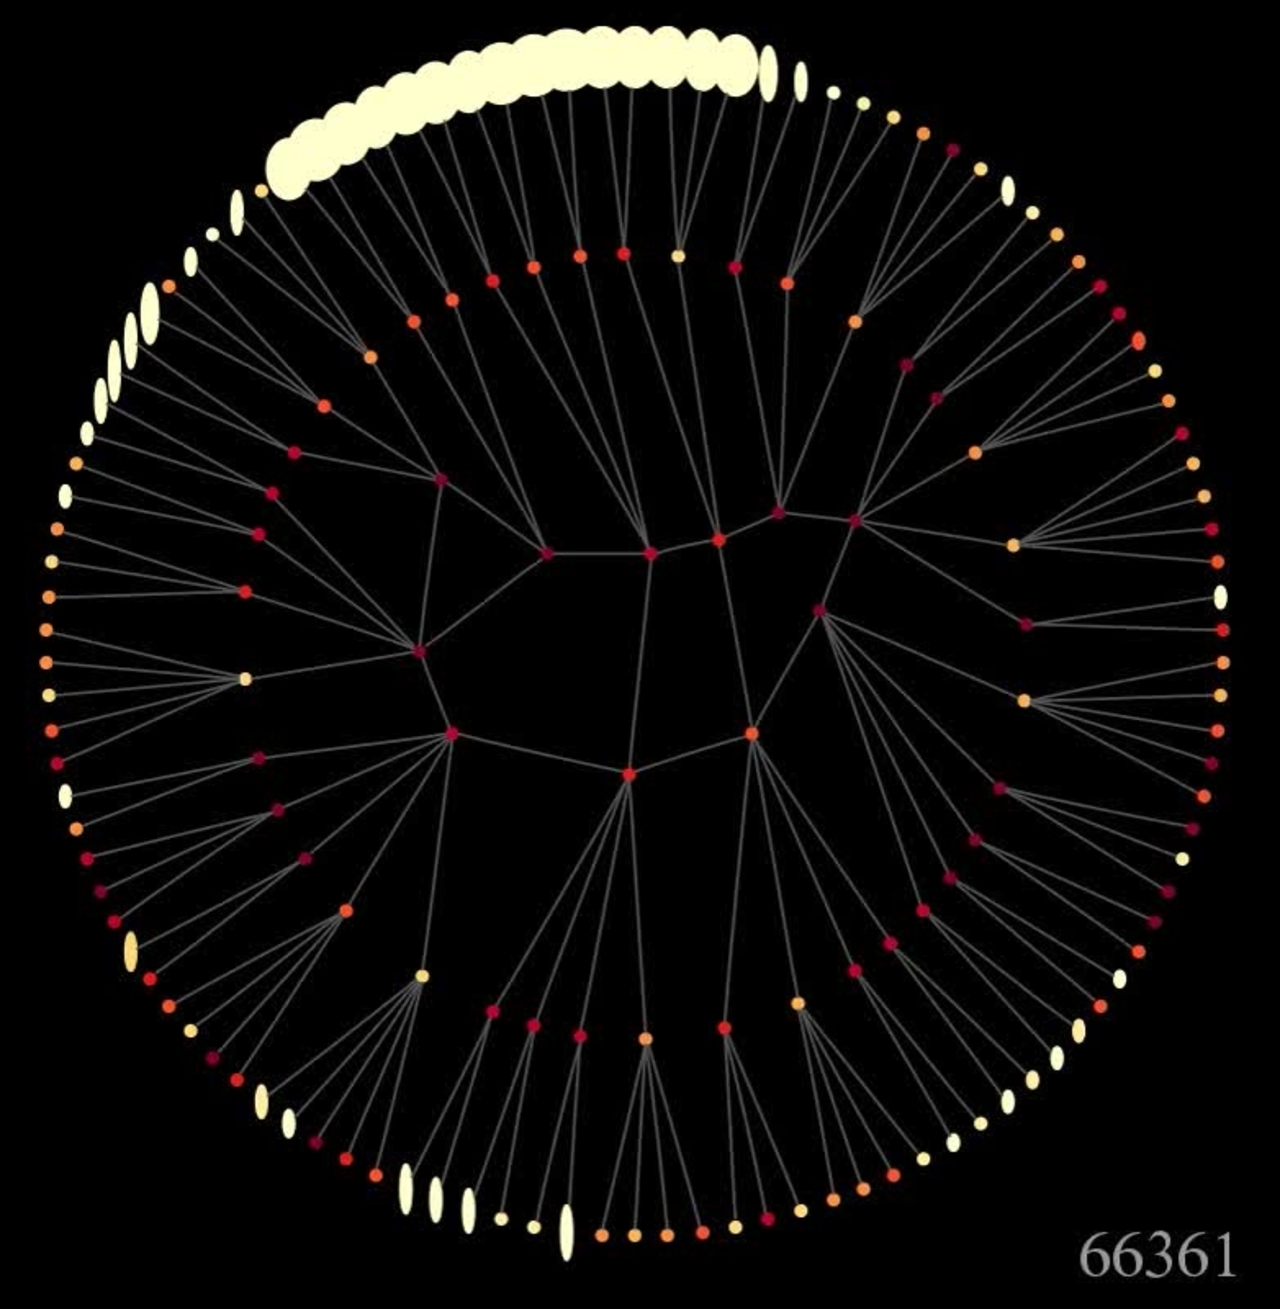 Visualization from a Simulation of an Abilene-style Network